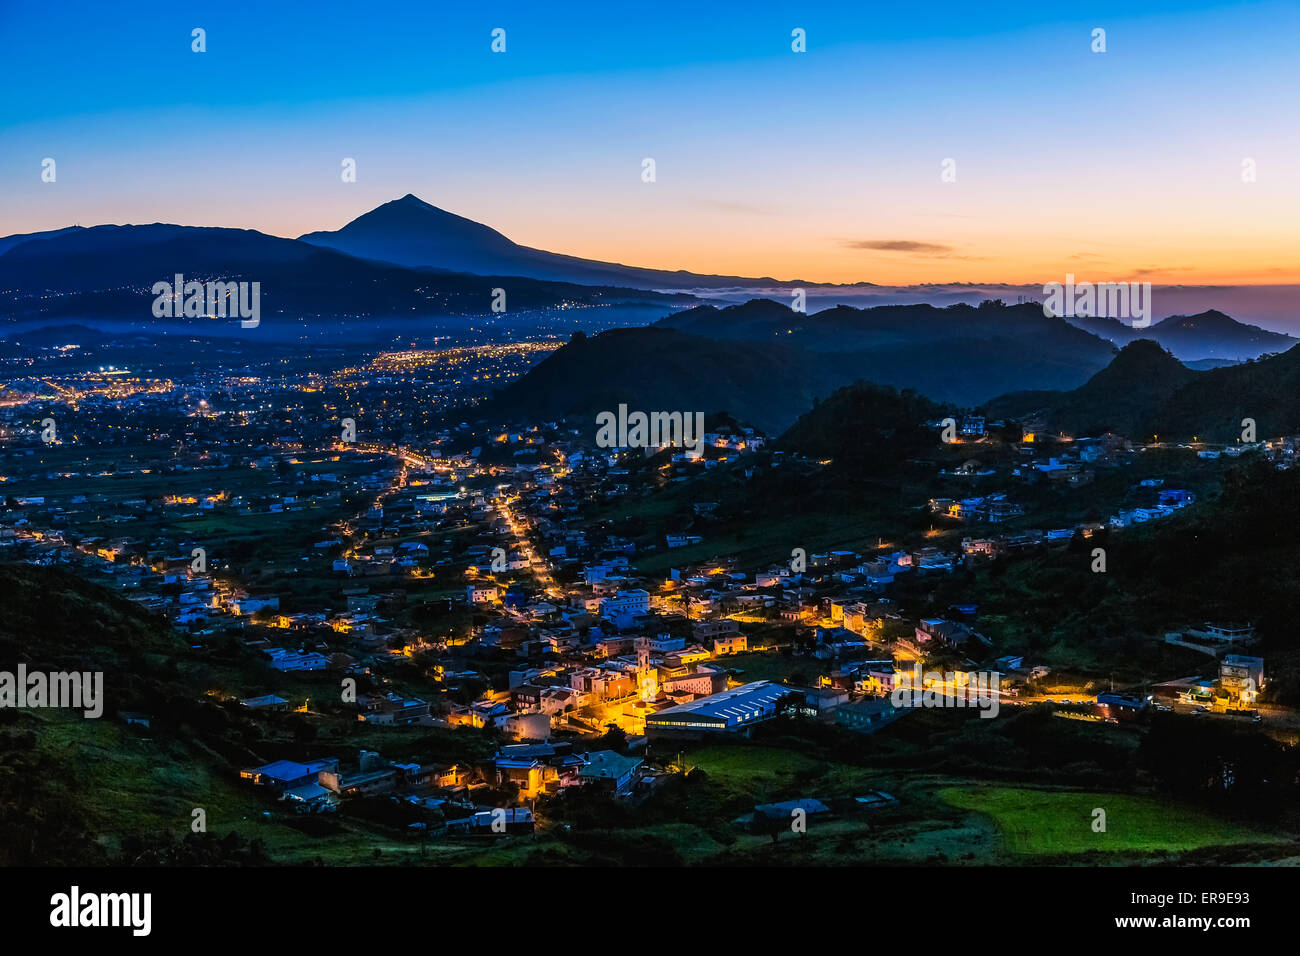 City or town with illumination after sunset or sundown at evening in mountains with blue sky and Teide volcano on background Stock Photo